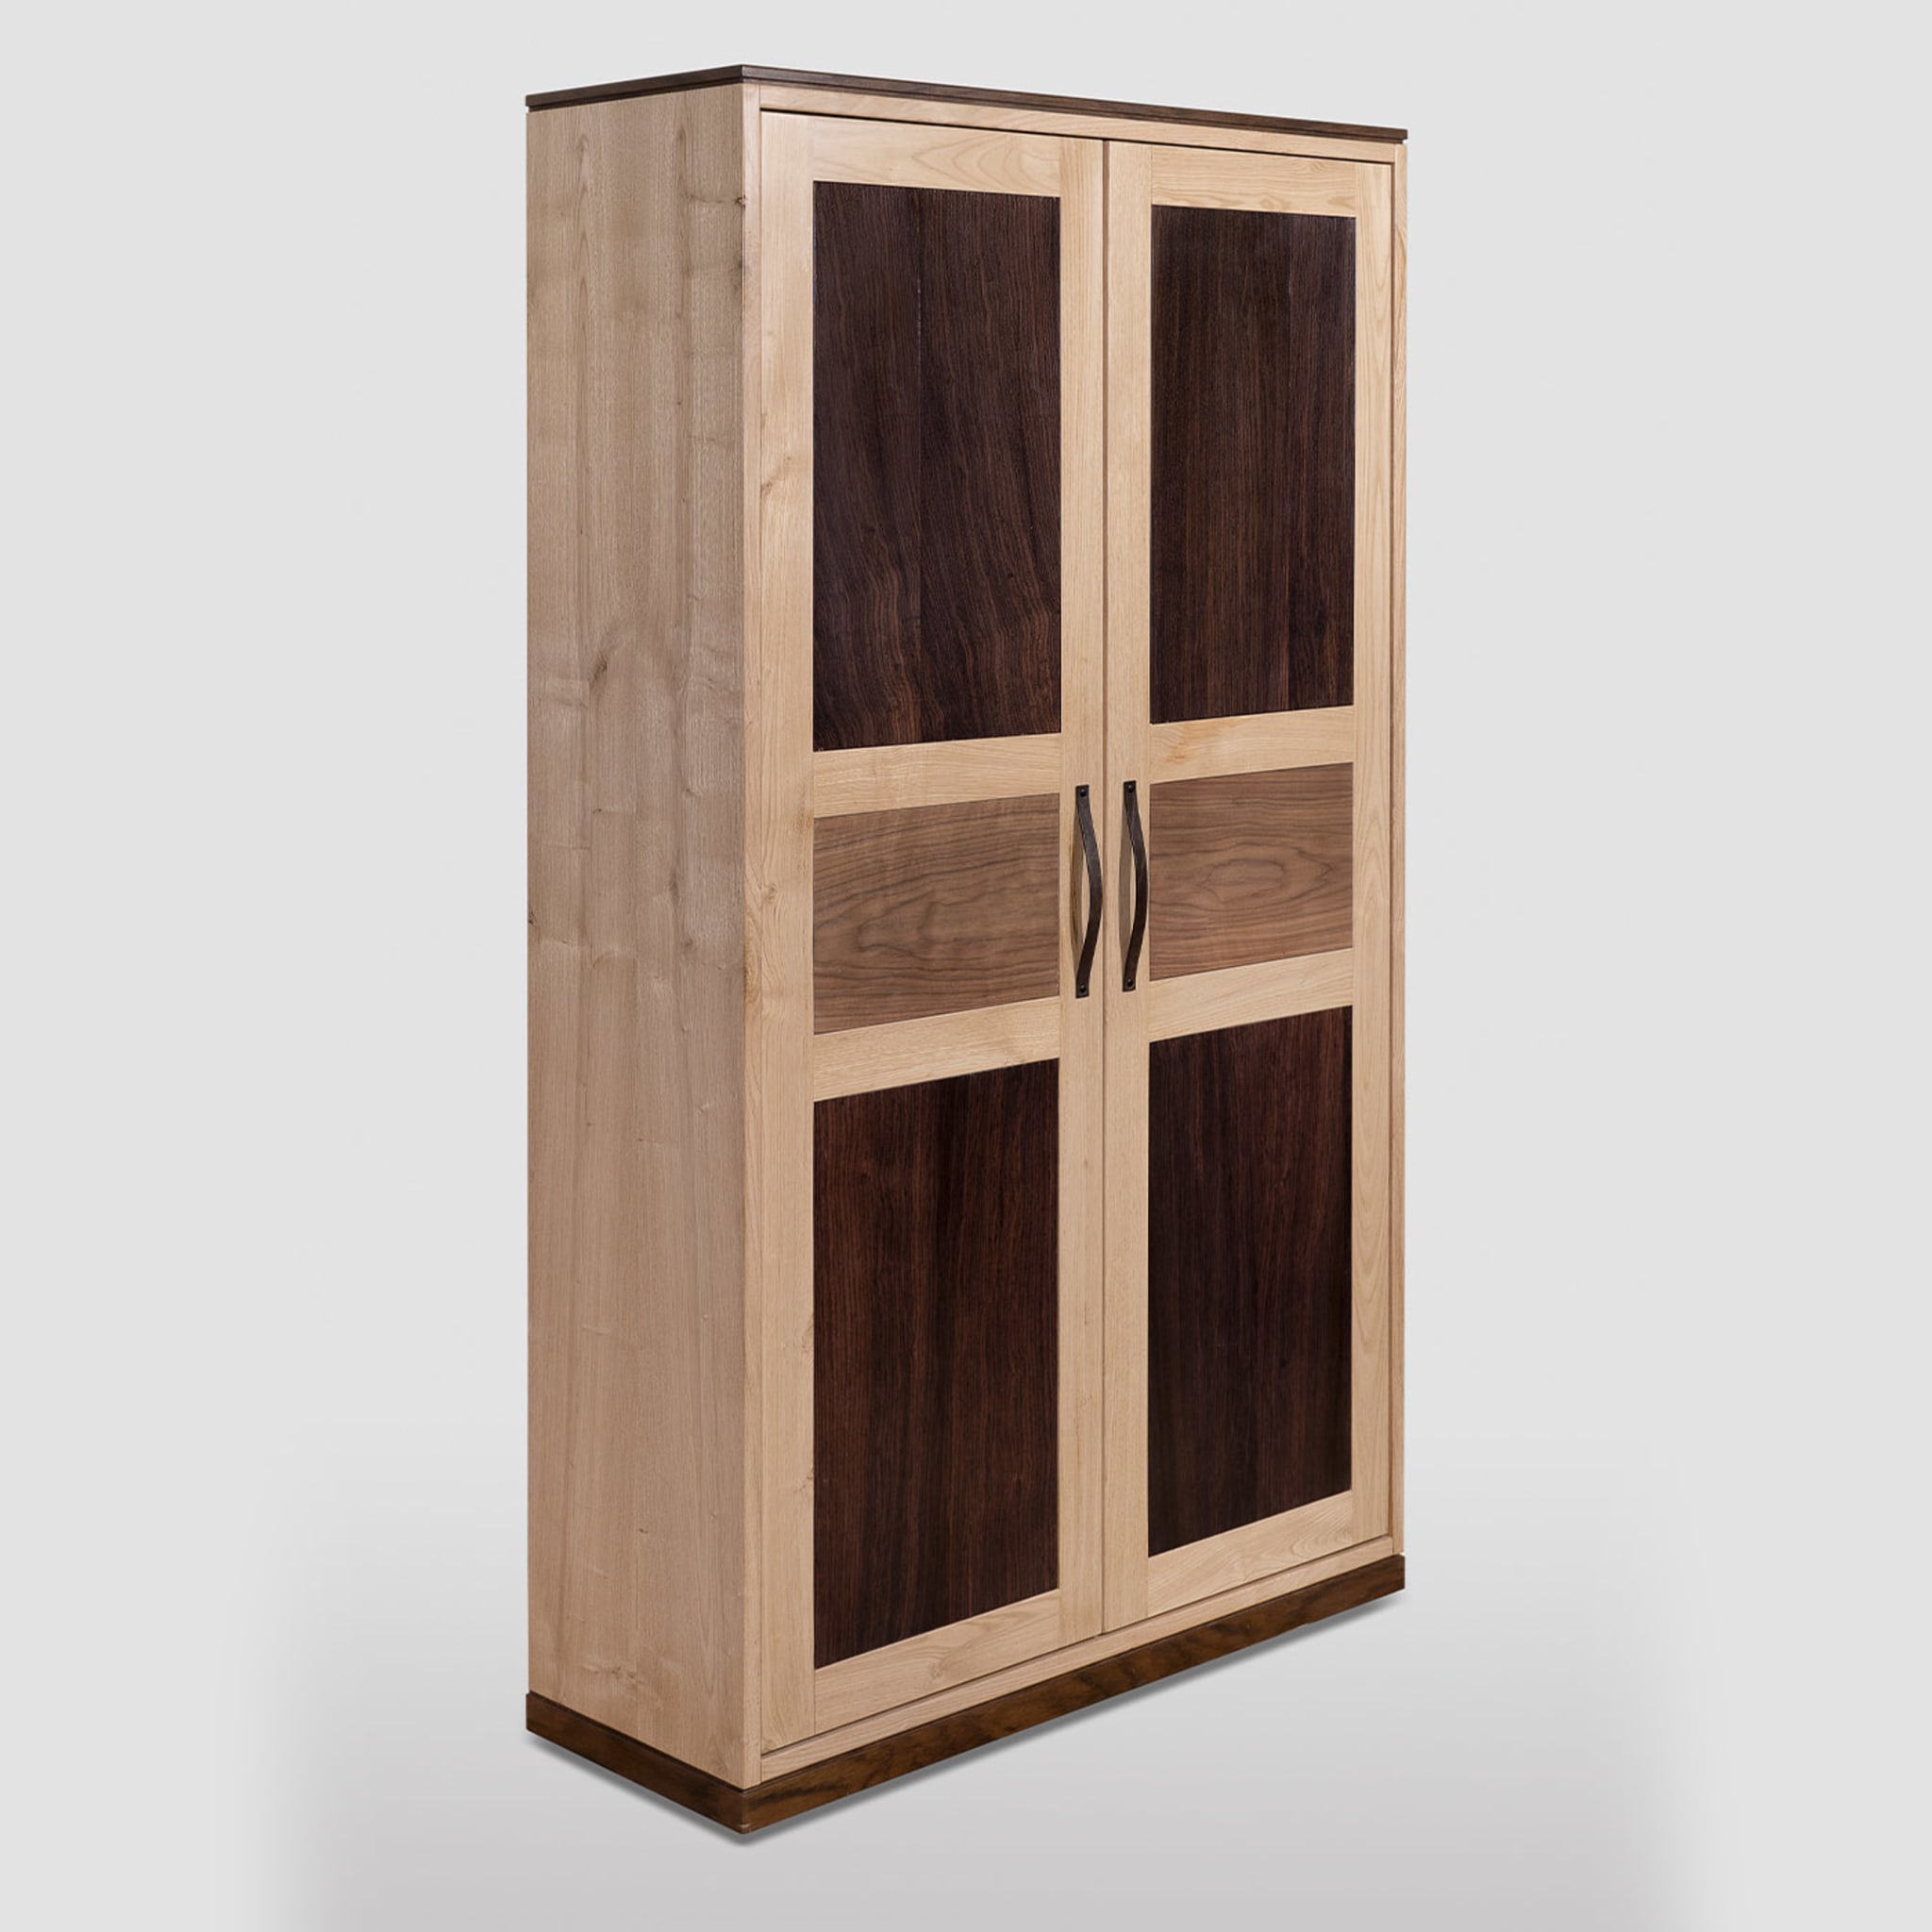 Mikael Two-Door Bookcase by Erika Gambella - Alternative view 1